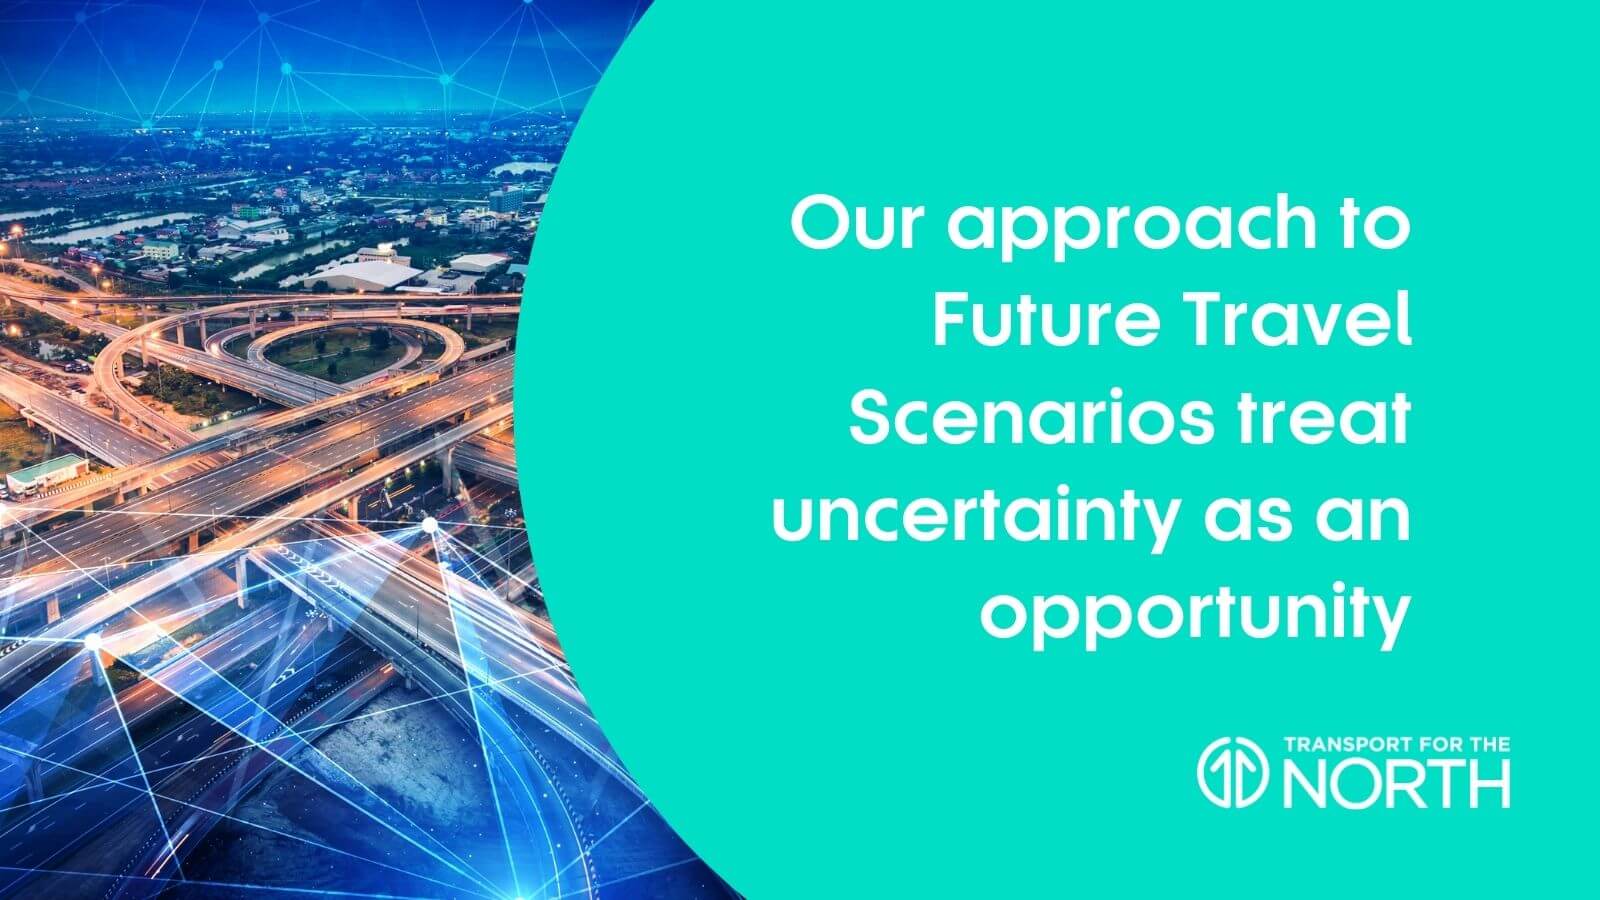 Our approach to Future Travel Scenarios treat uncertainty as an opportunity